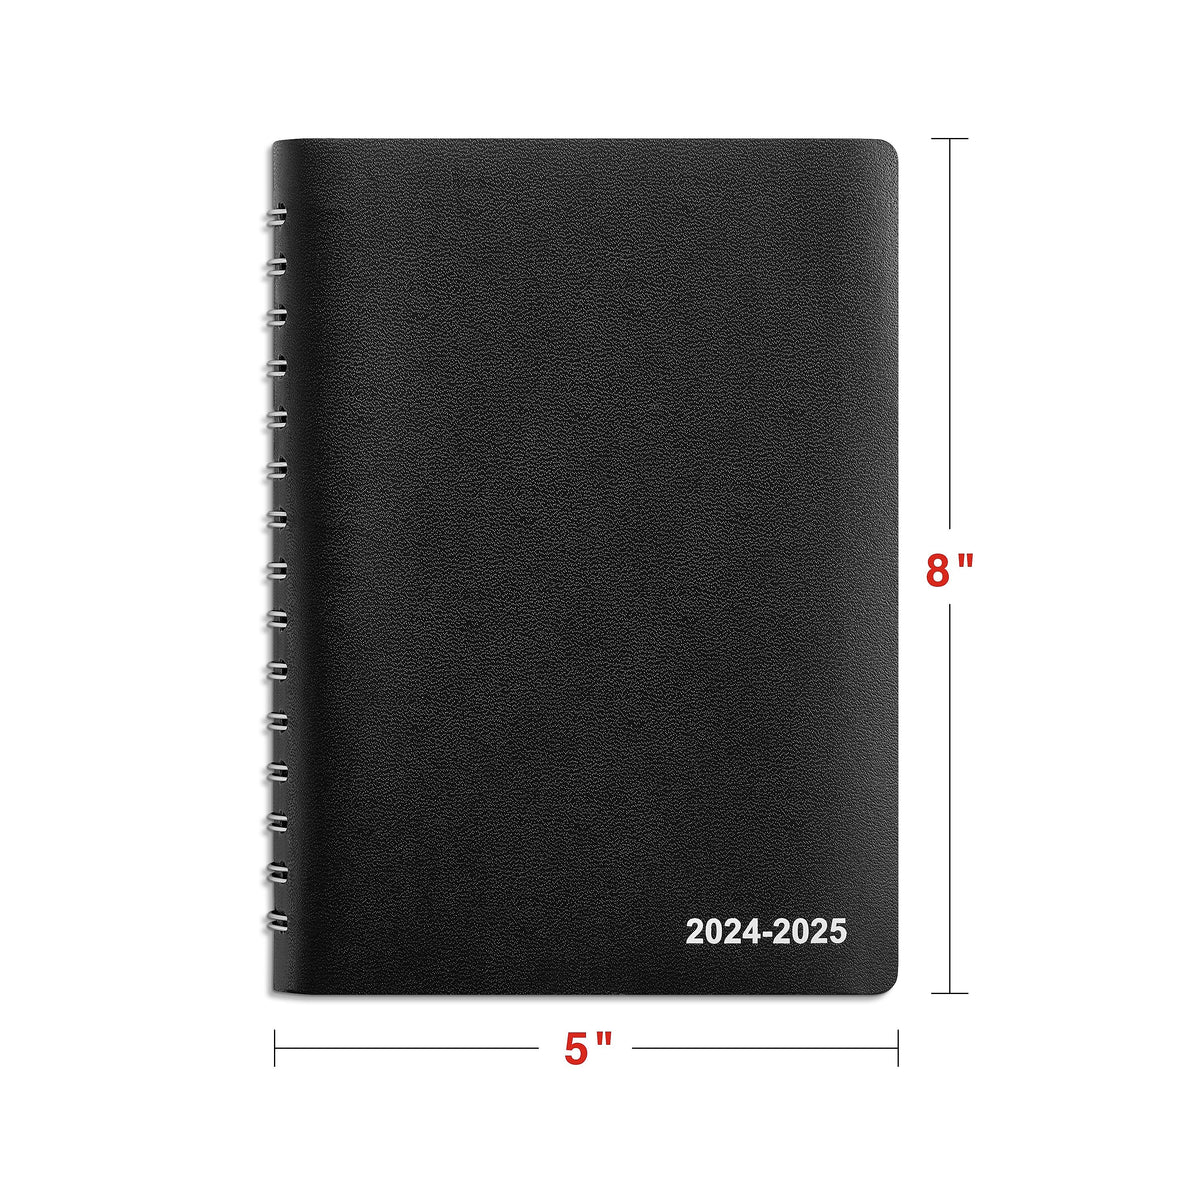 2024-2025 Staples 5" x 8" Academic Daily Appointment Book, Faux Leather Cover, Black